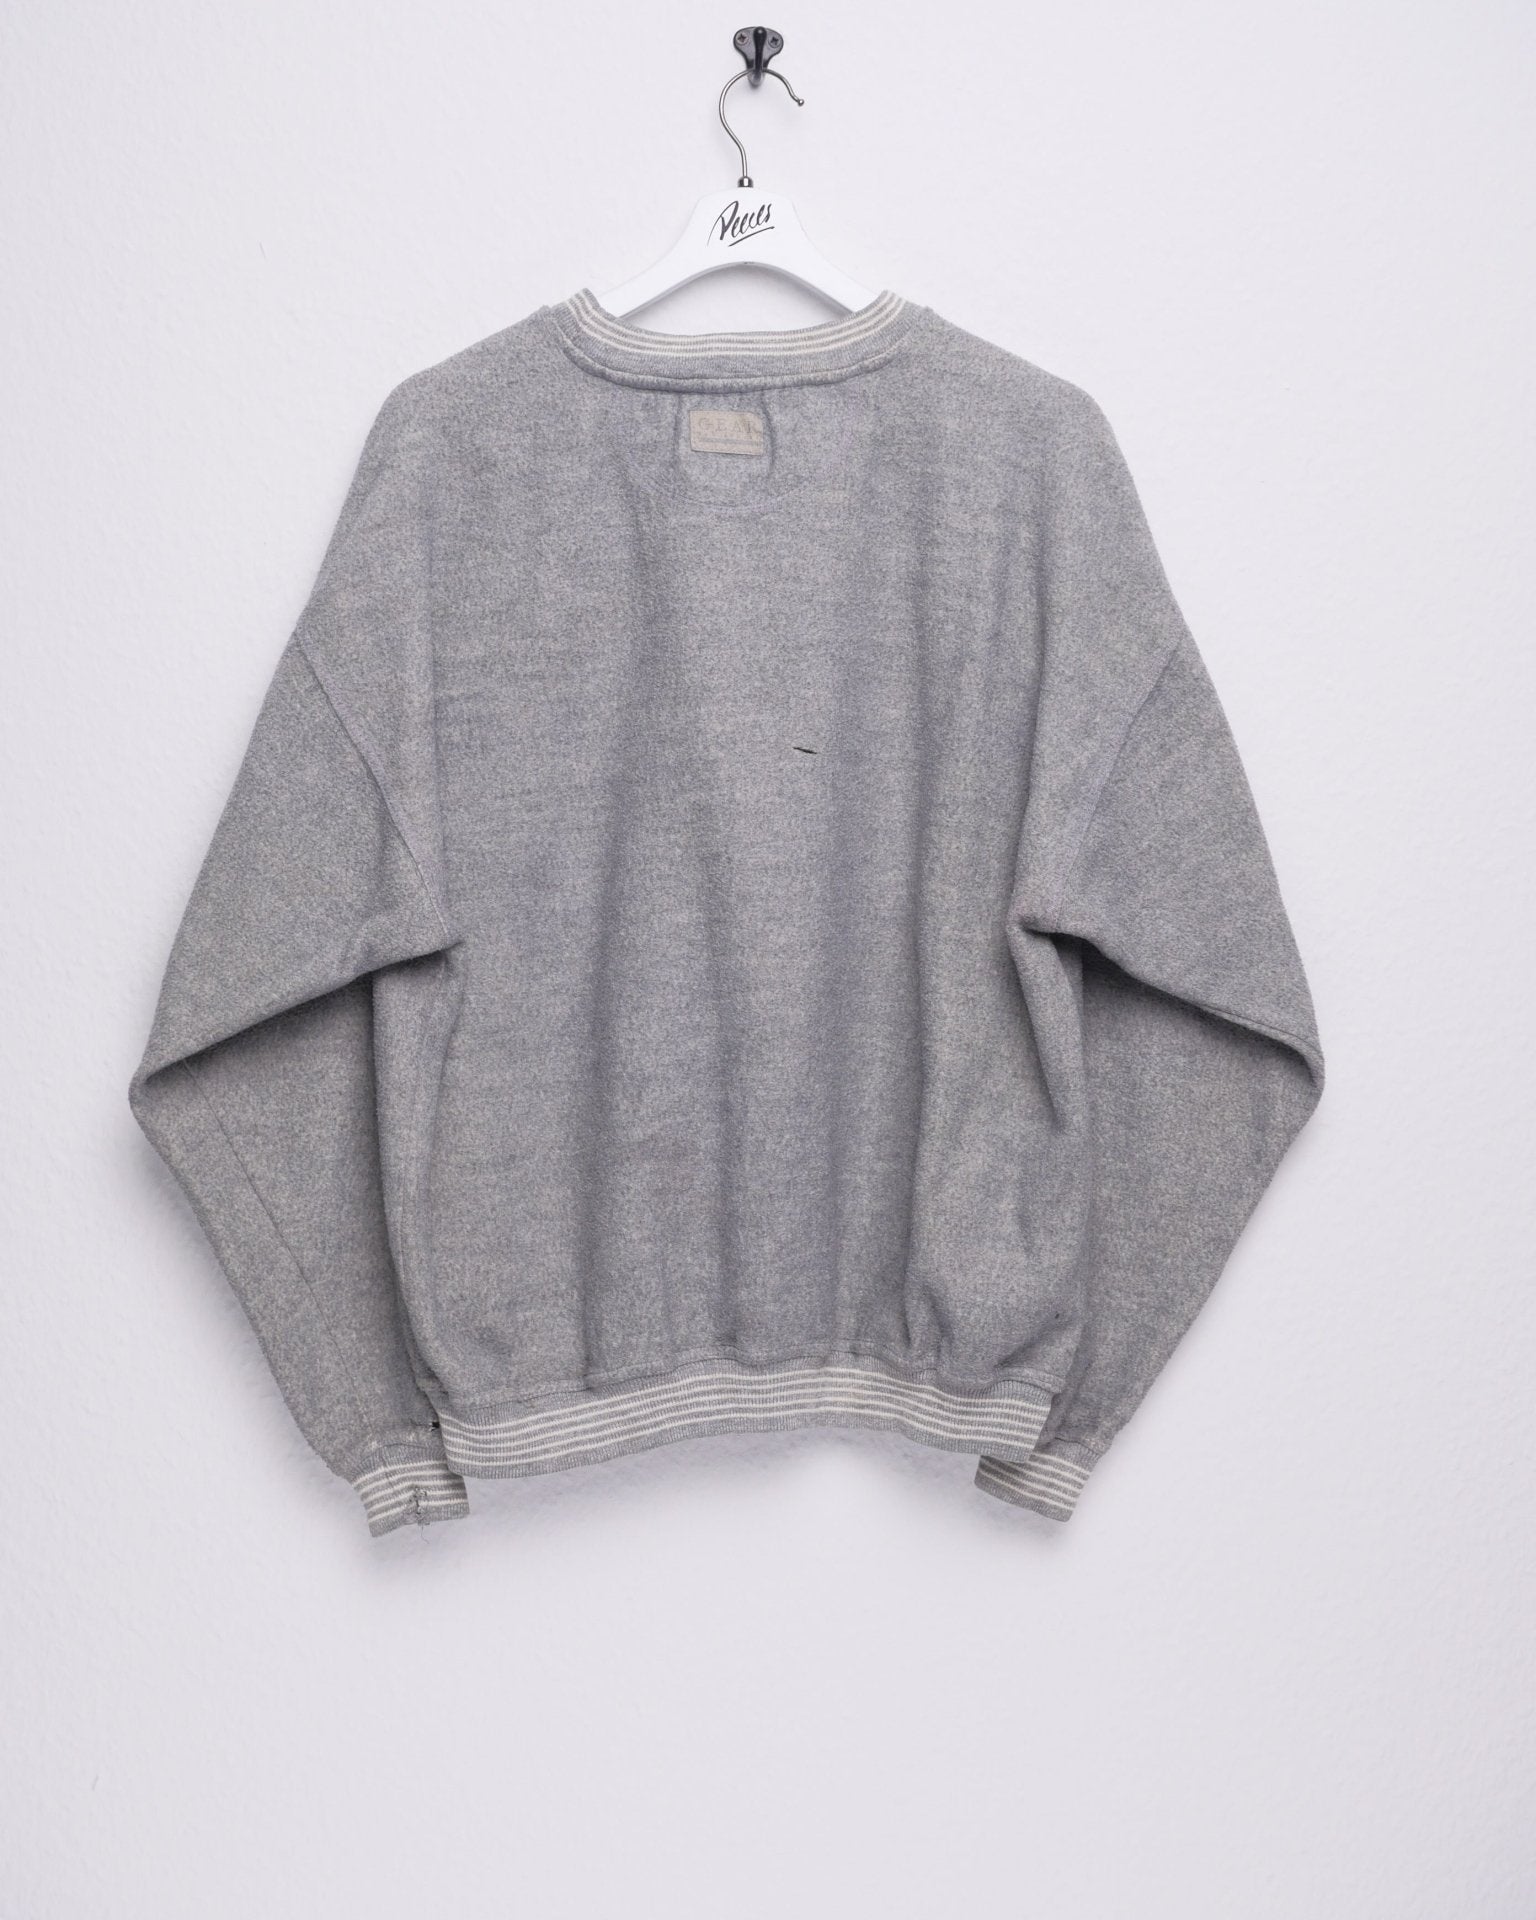 'Northwest Missouri State' printed Spellout grey Sweater - Peeces